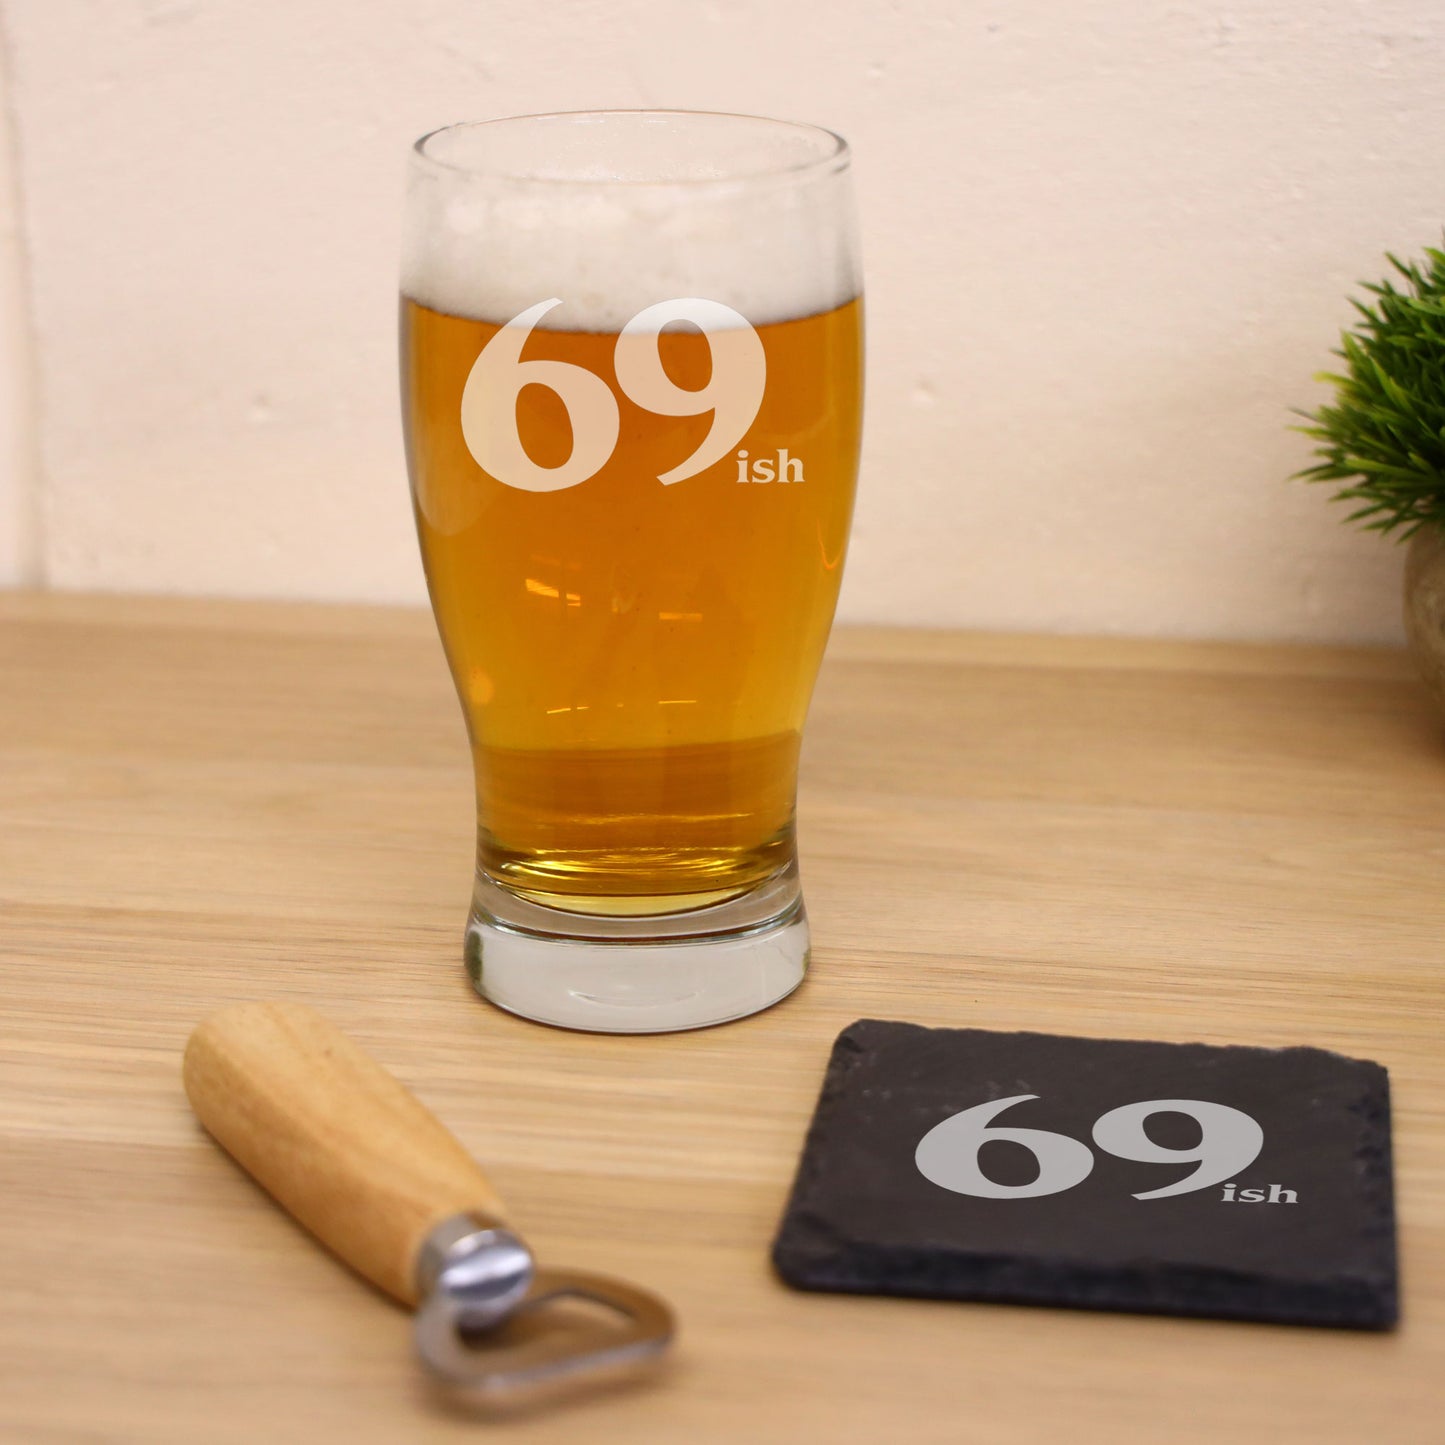 69ish Pint Glass and/or Coaster Set  - Always Looking Good - Glass & Square Coaster Set  